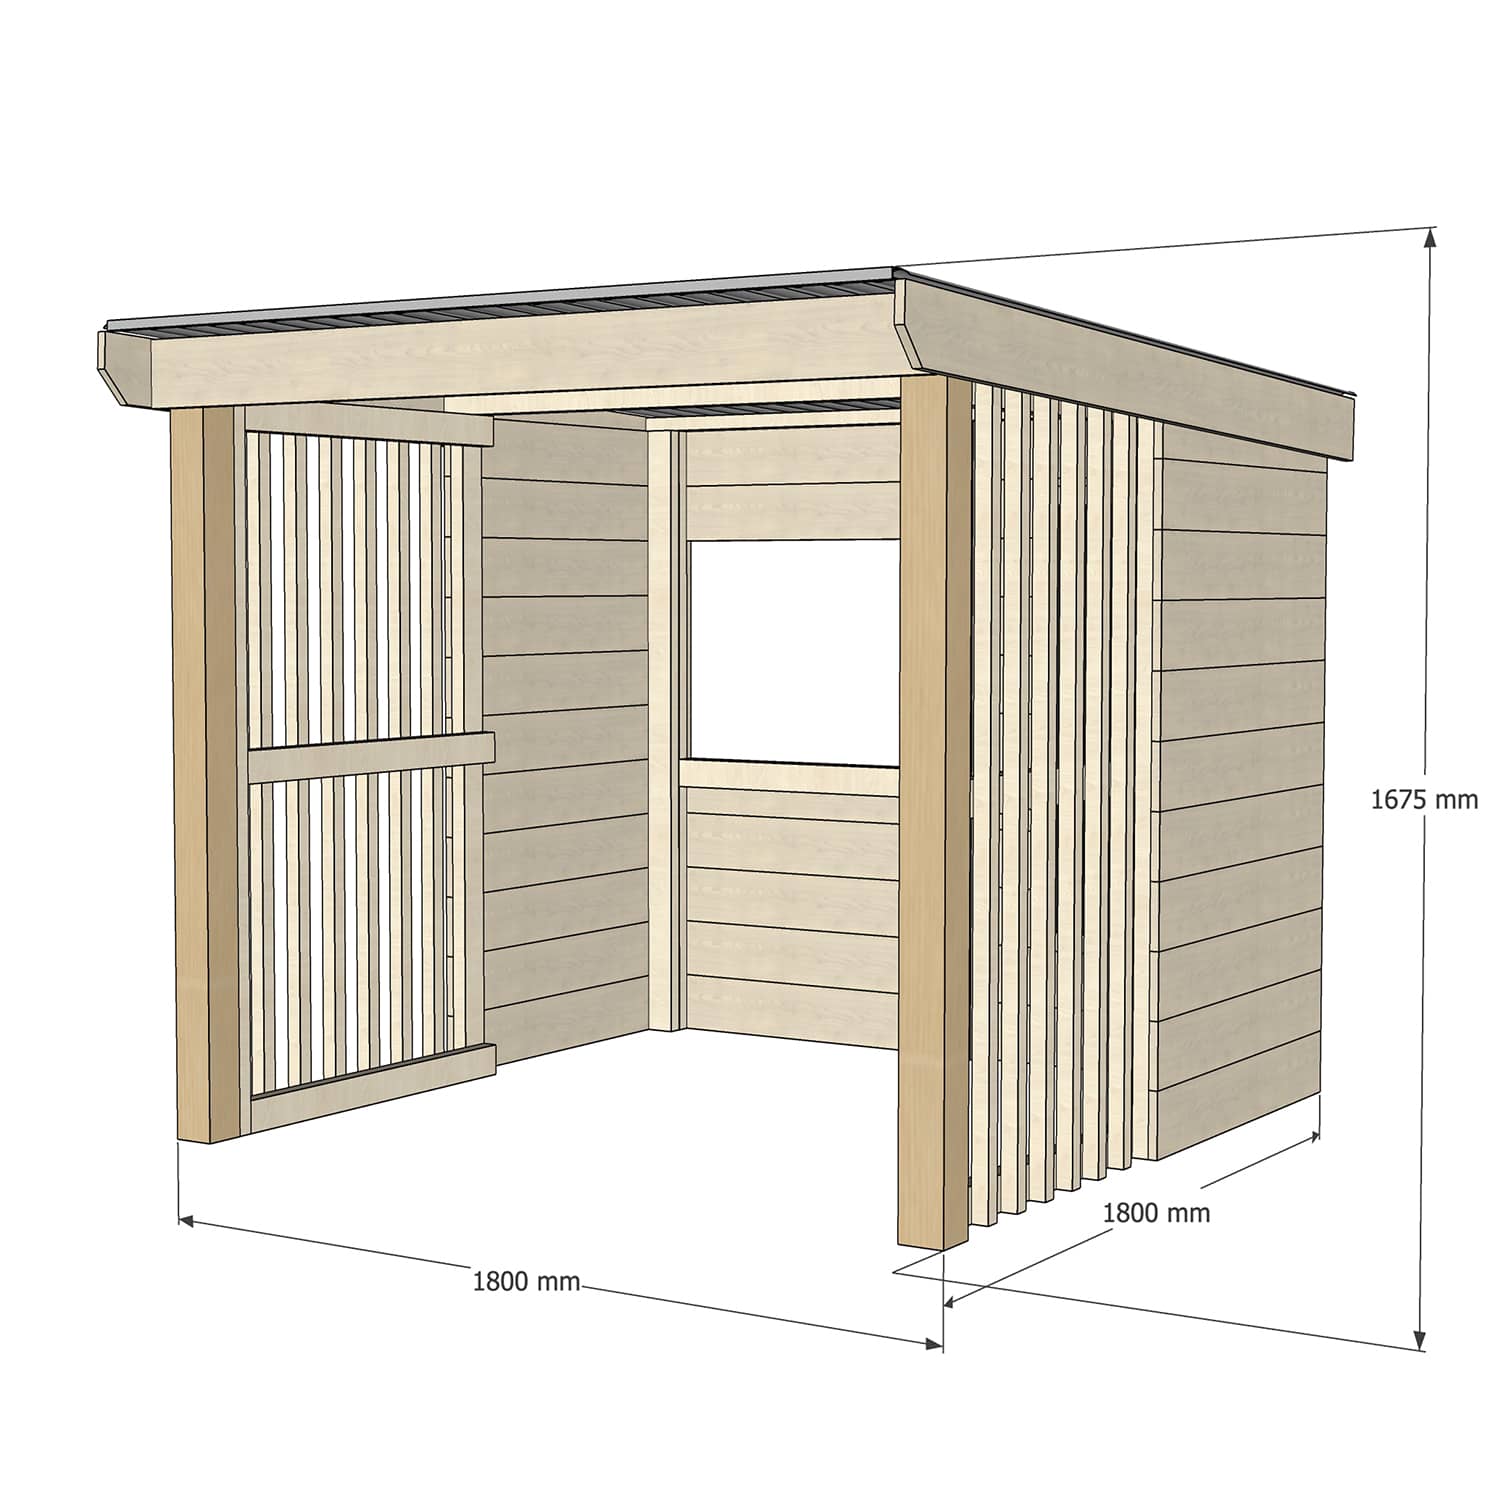 Raw open front timber shelter no floor with dimensions